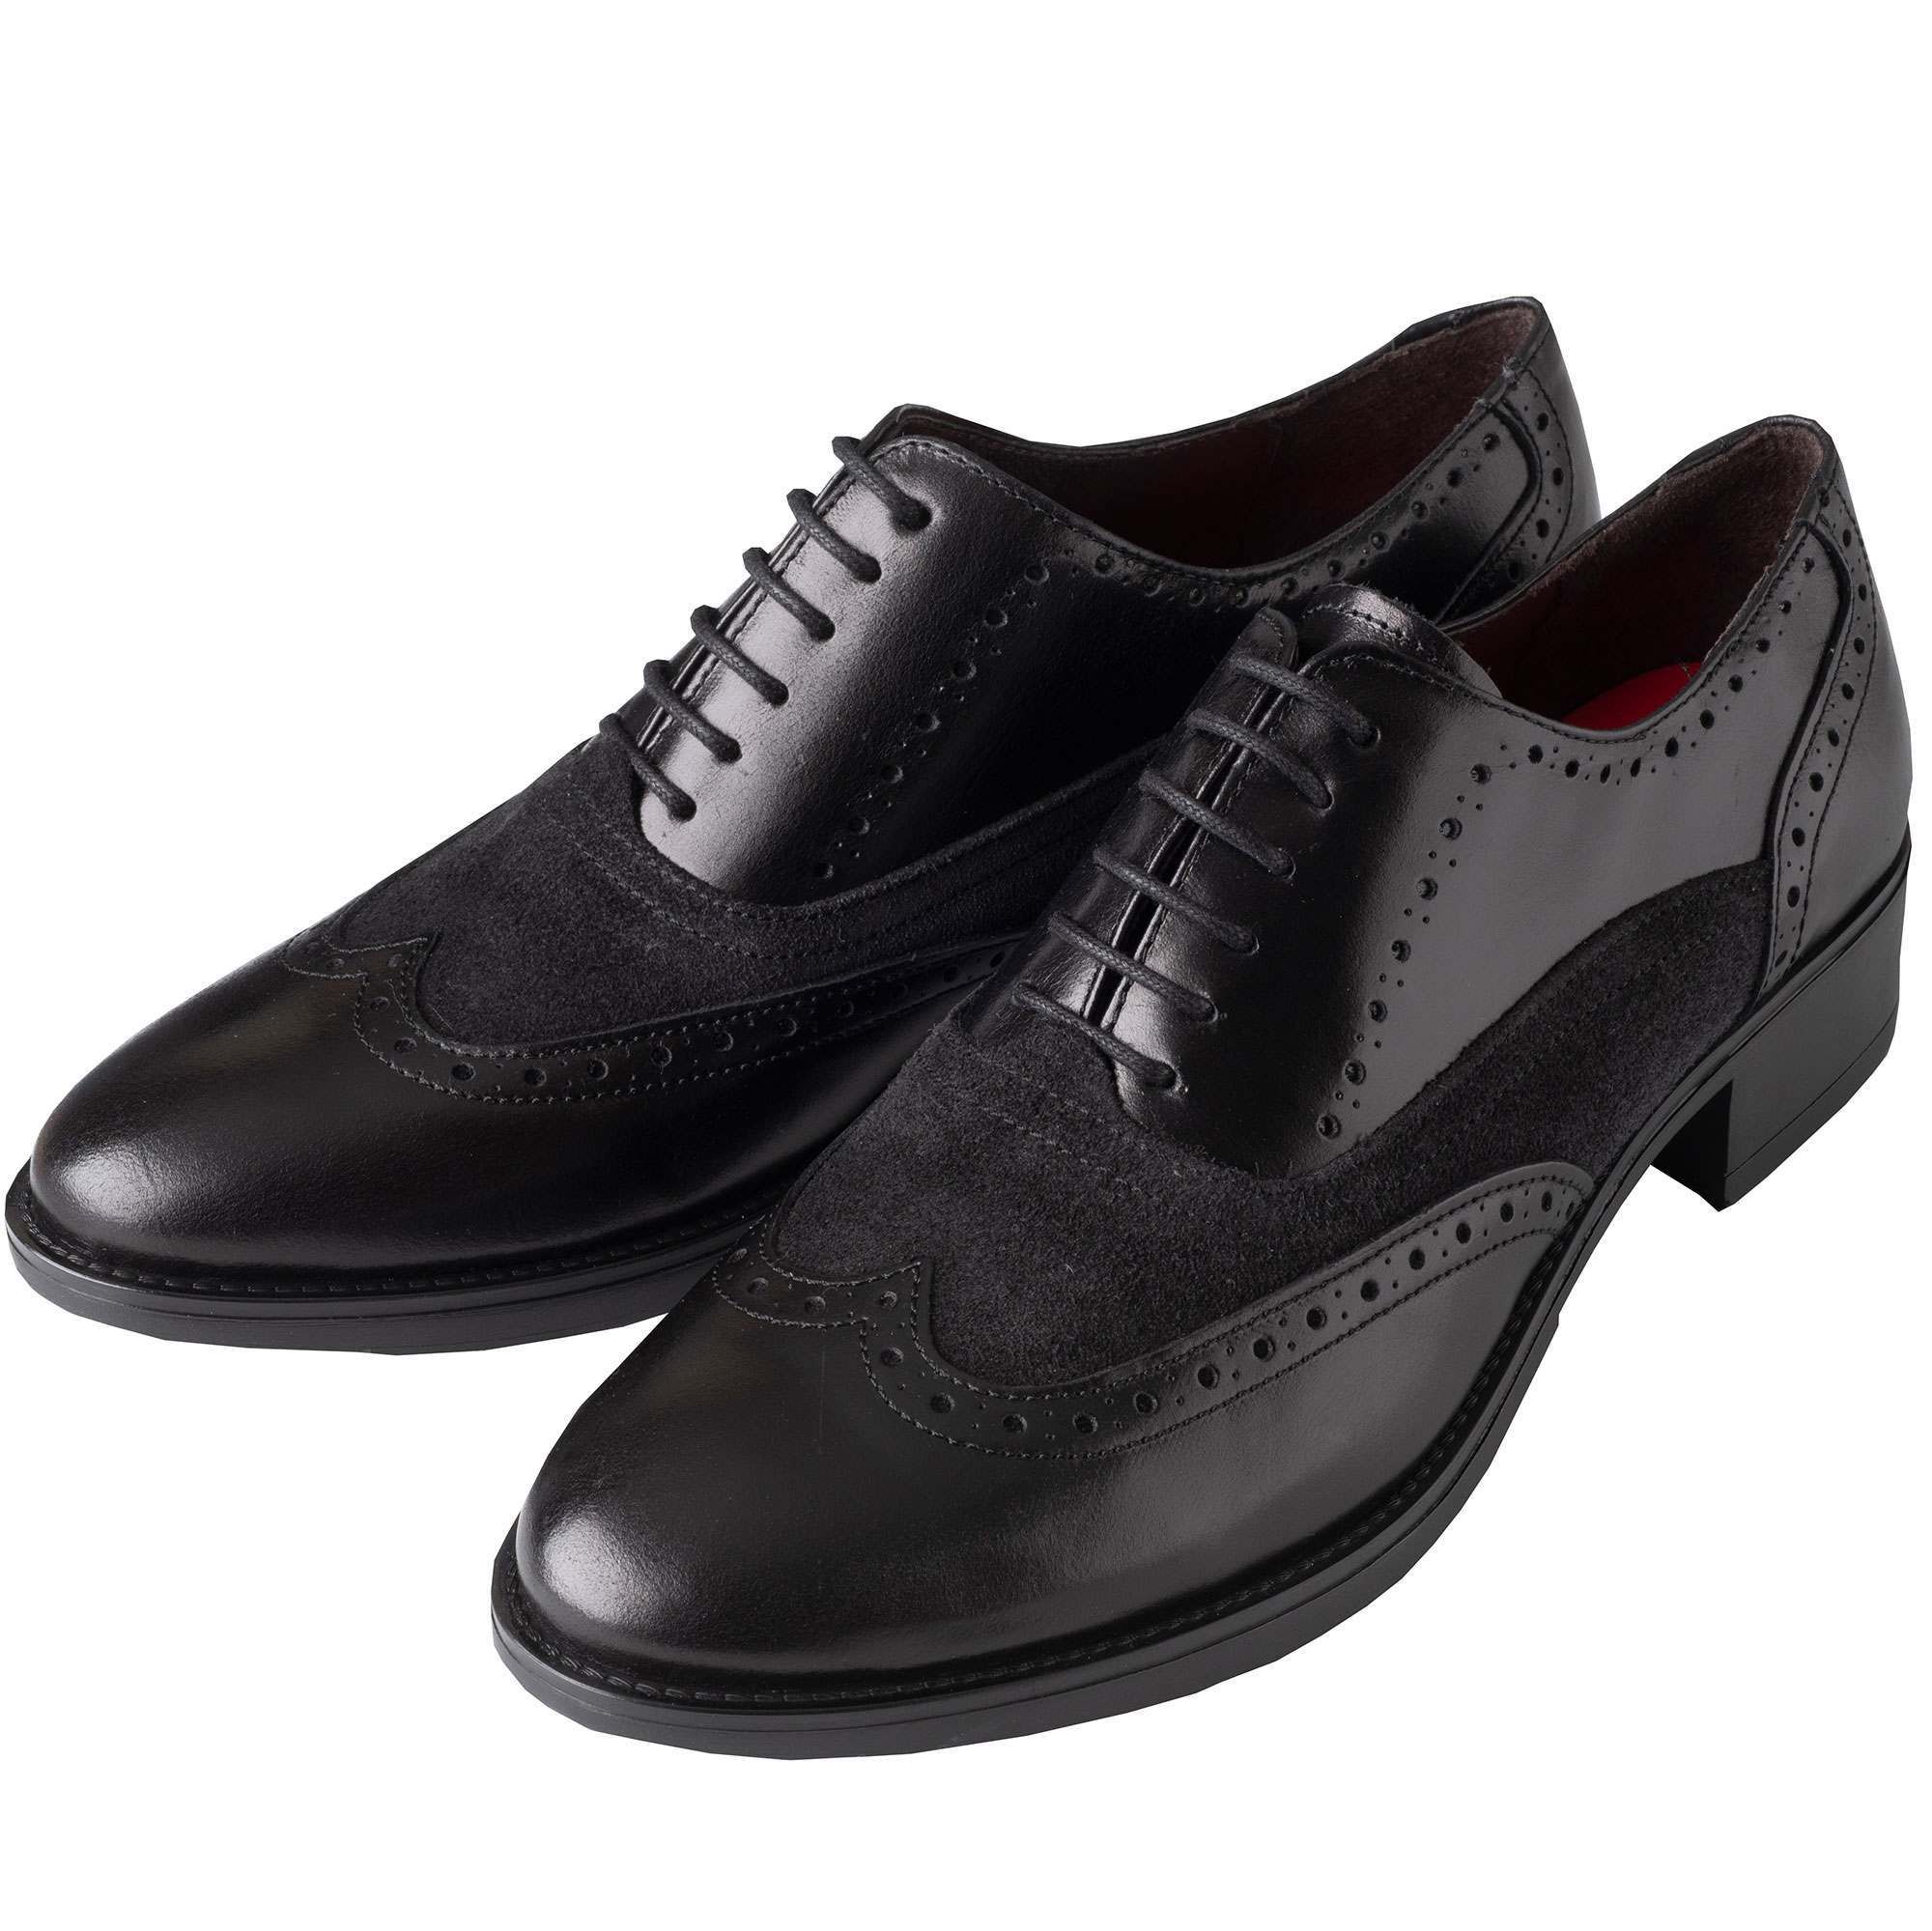 black leather brogue shoes